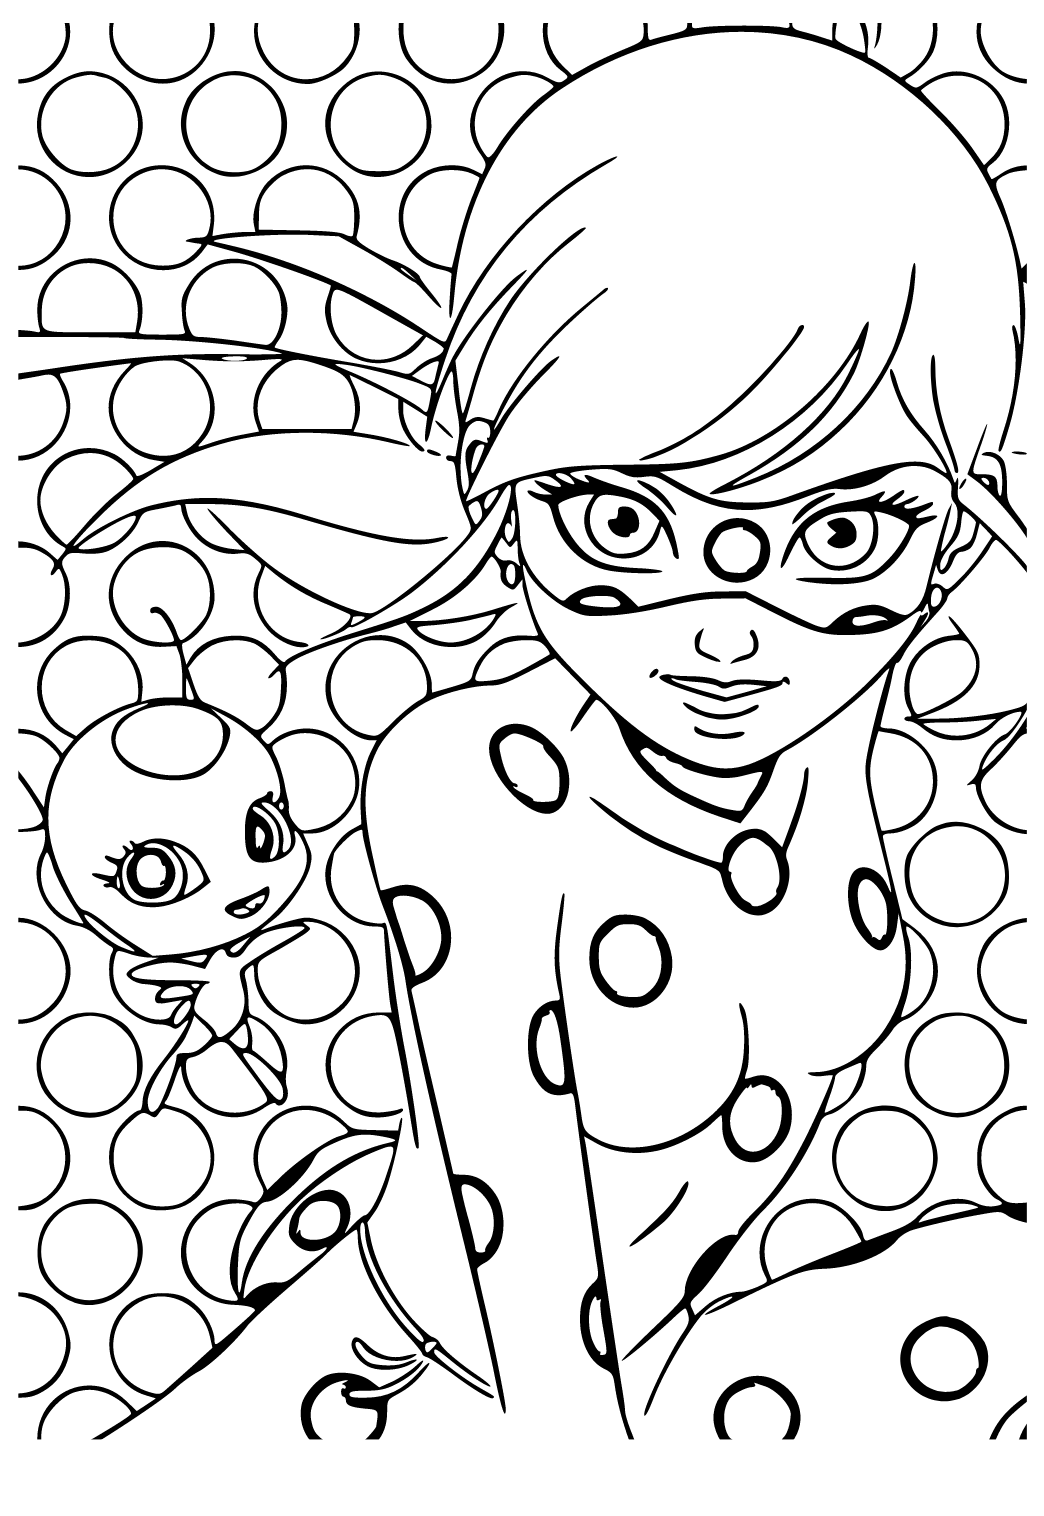 Free printable miraculous ladybug assistant coloring page for adults and kids